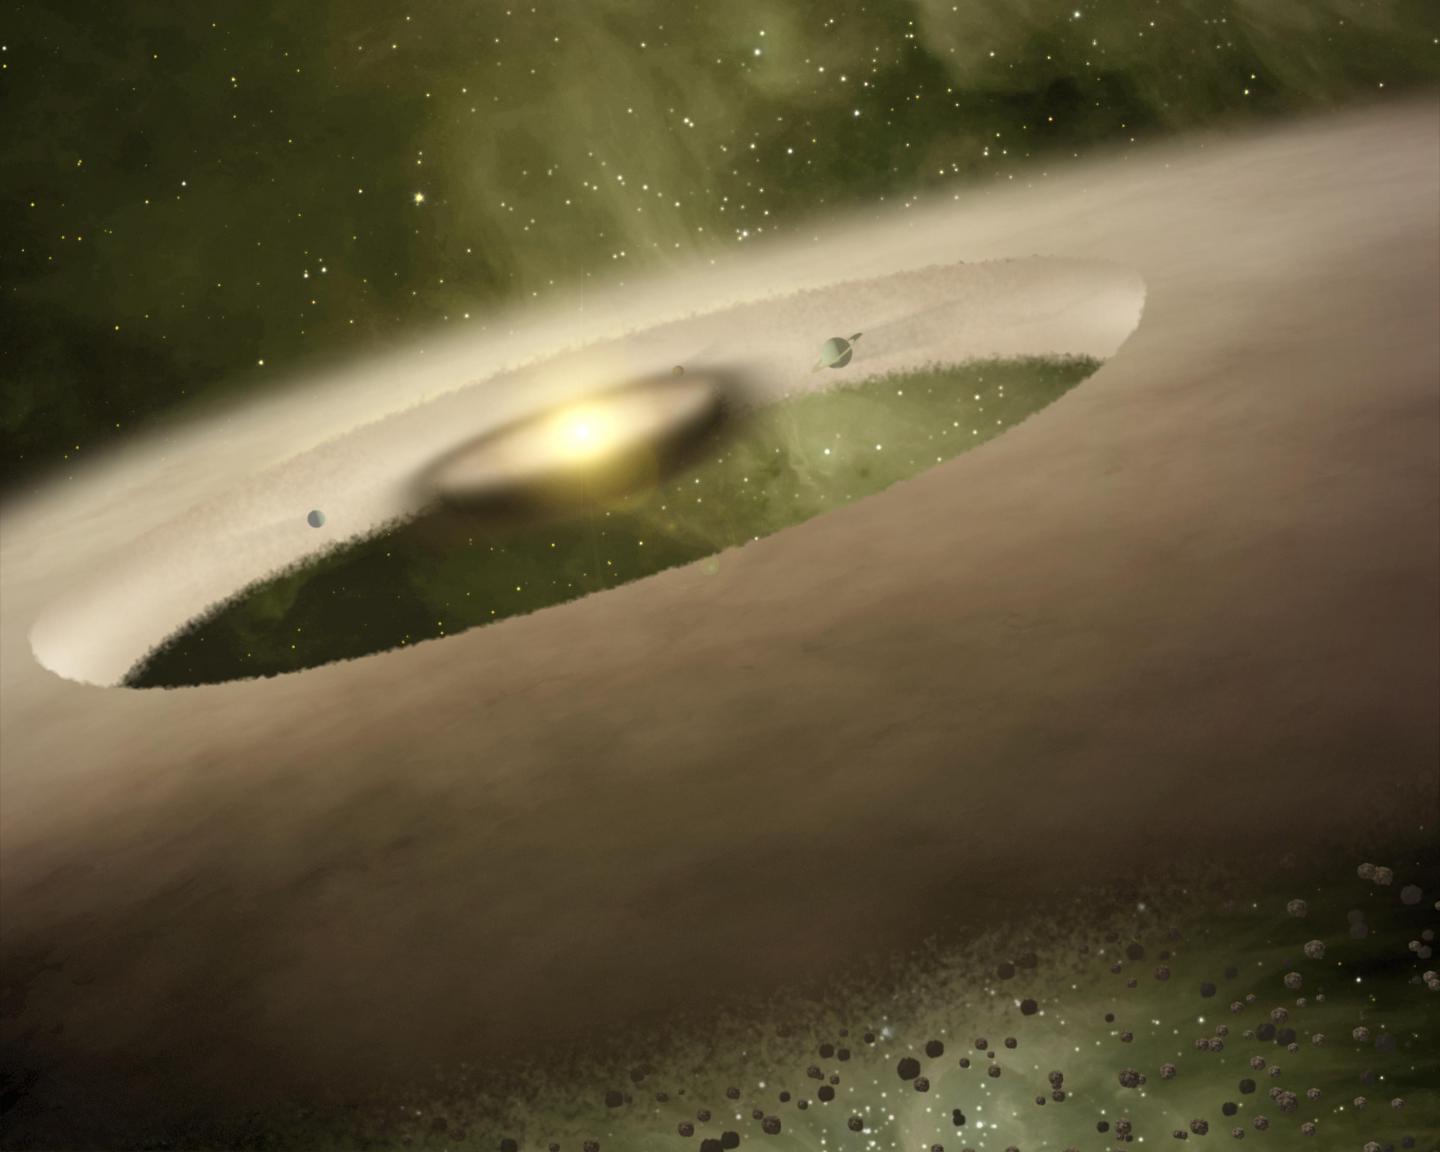 An Artist's Impression of a Young Star System